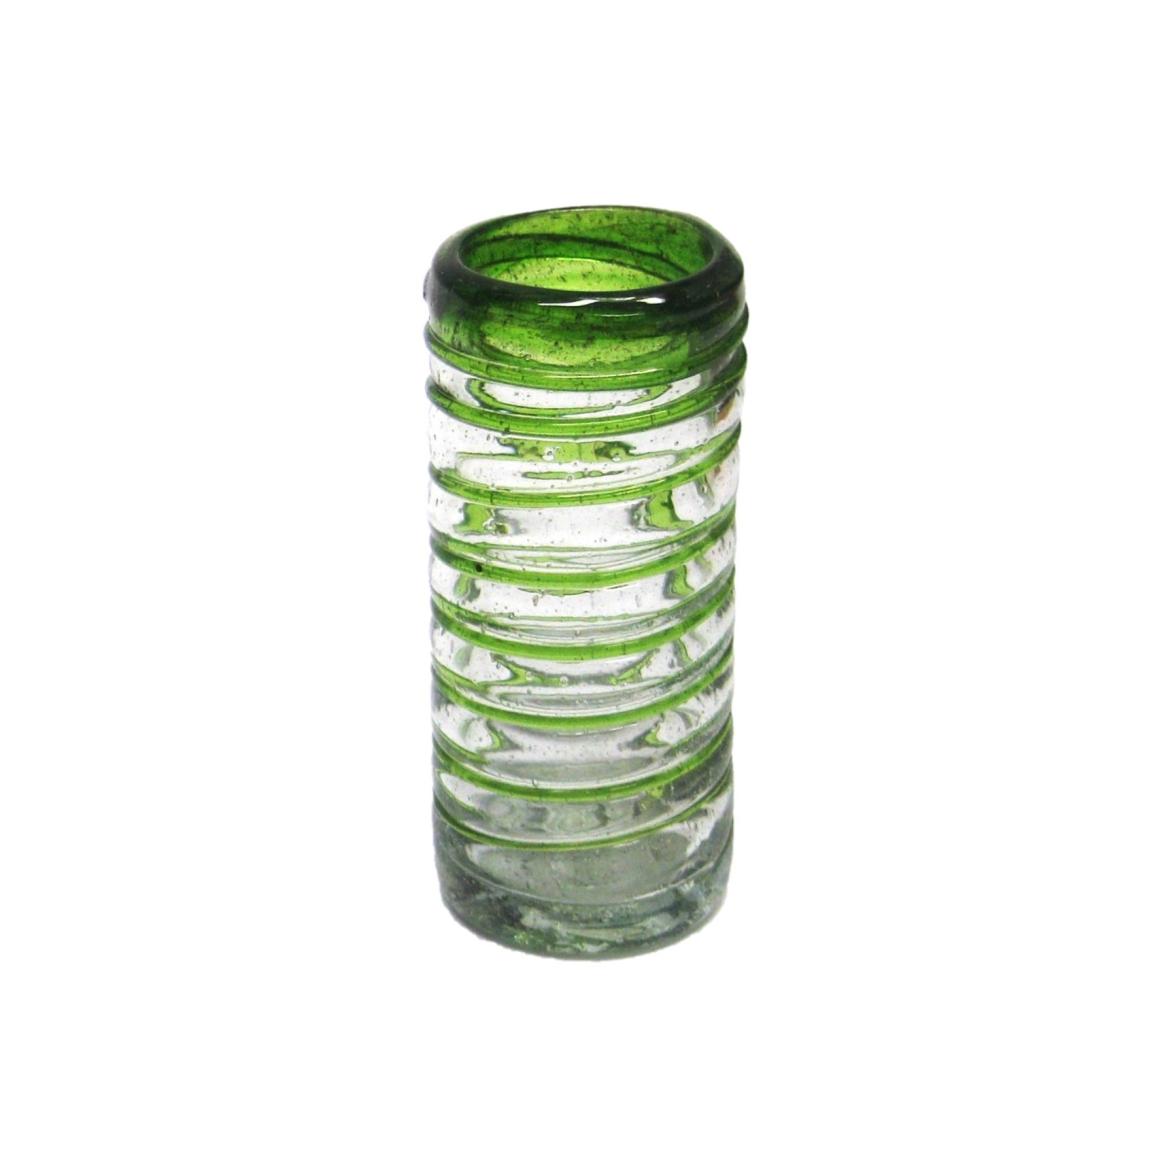 Wholesale Tequila Shot Glasses / Emerald Green Spiral 2 oz Tequila Shot Glasses  / Emerald green threads spinned to embrace these gorgeous shot glasses, perfect for parties or enjoying your favorite liquor.